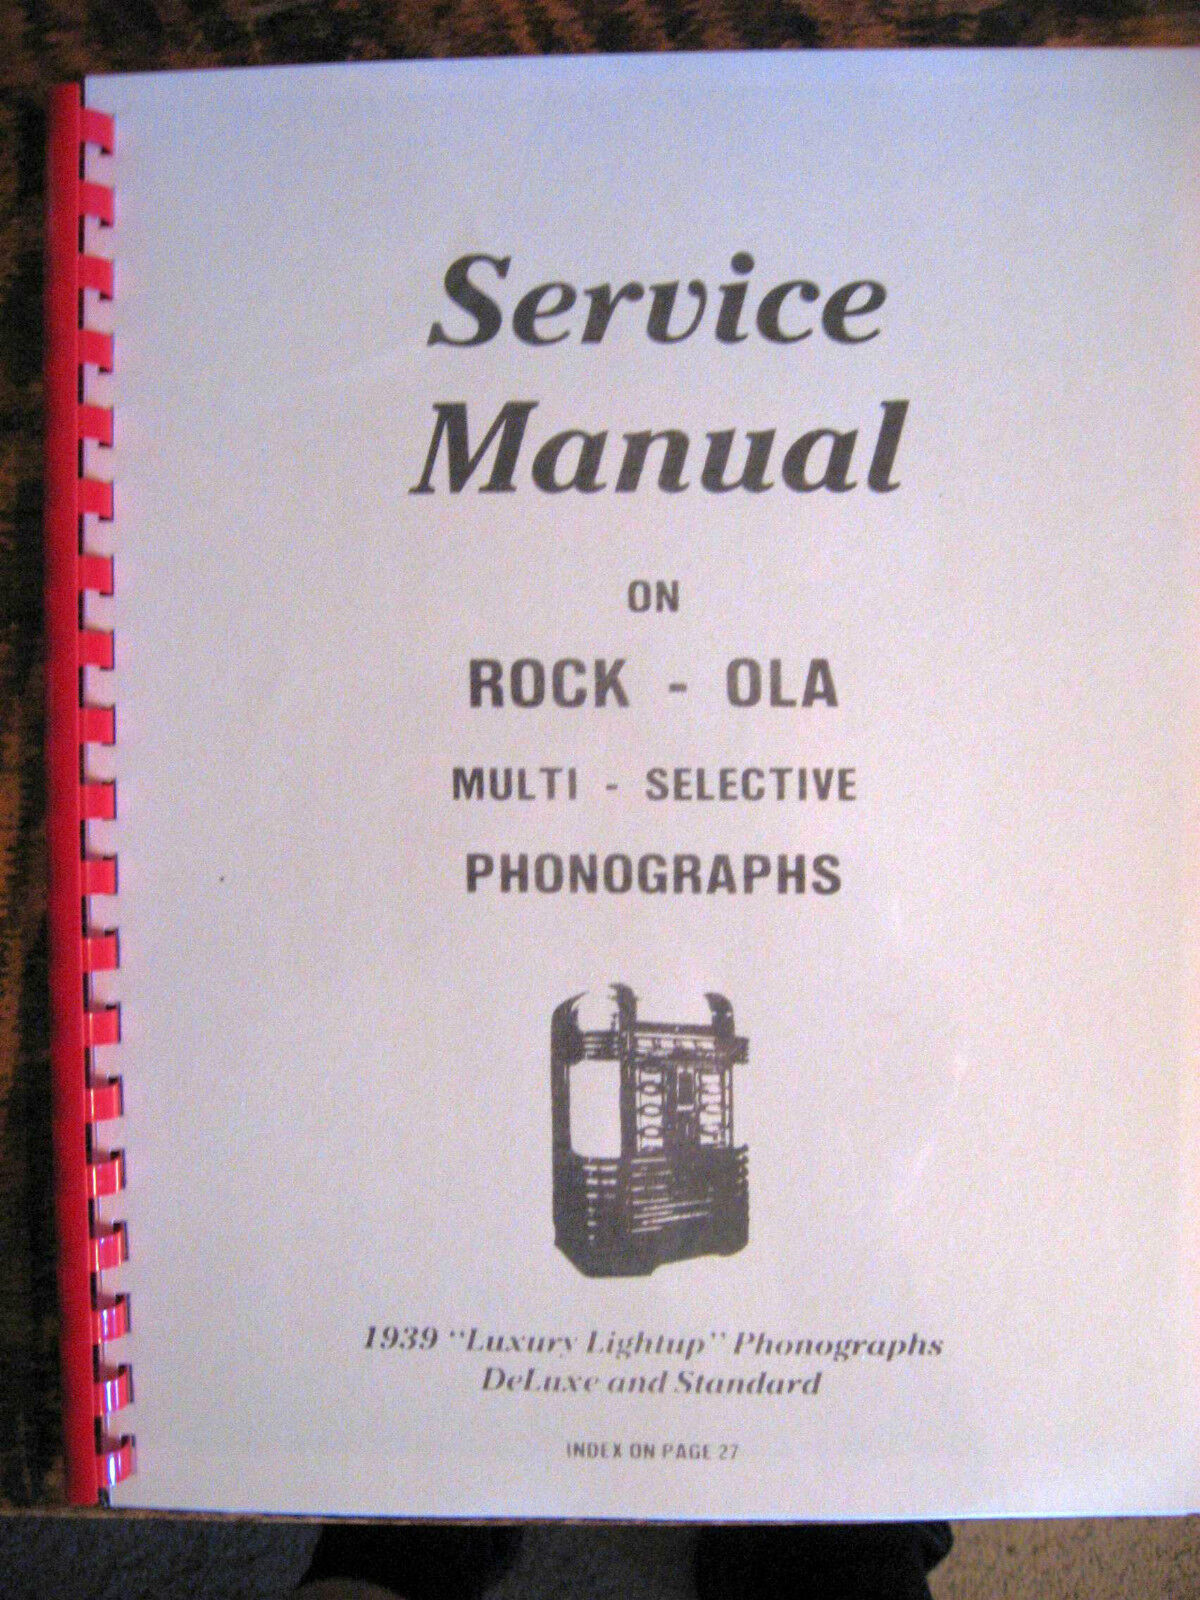 Rock-ola 1939 Luxury Lightup DeLuxe and Standard Manual